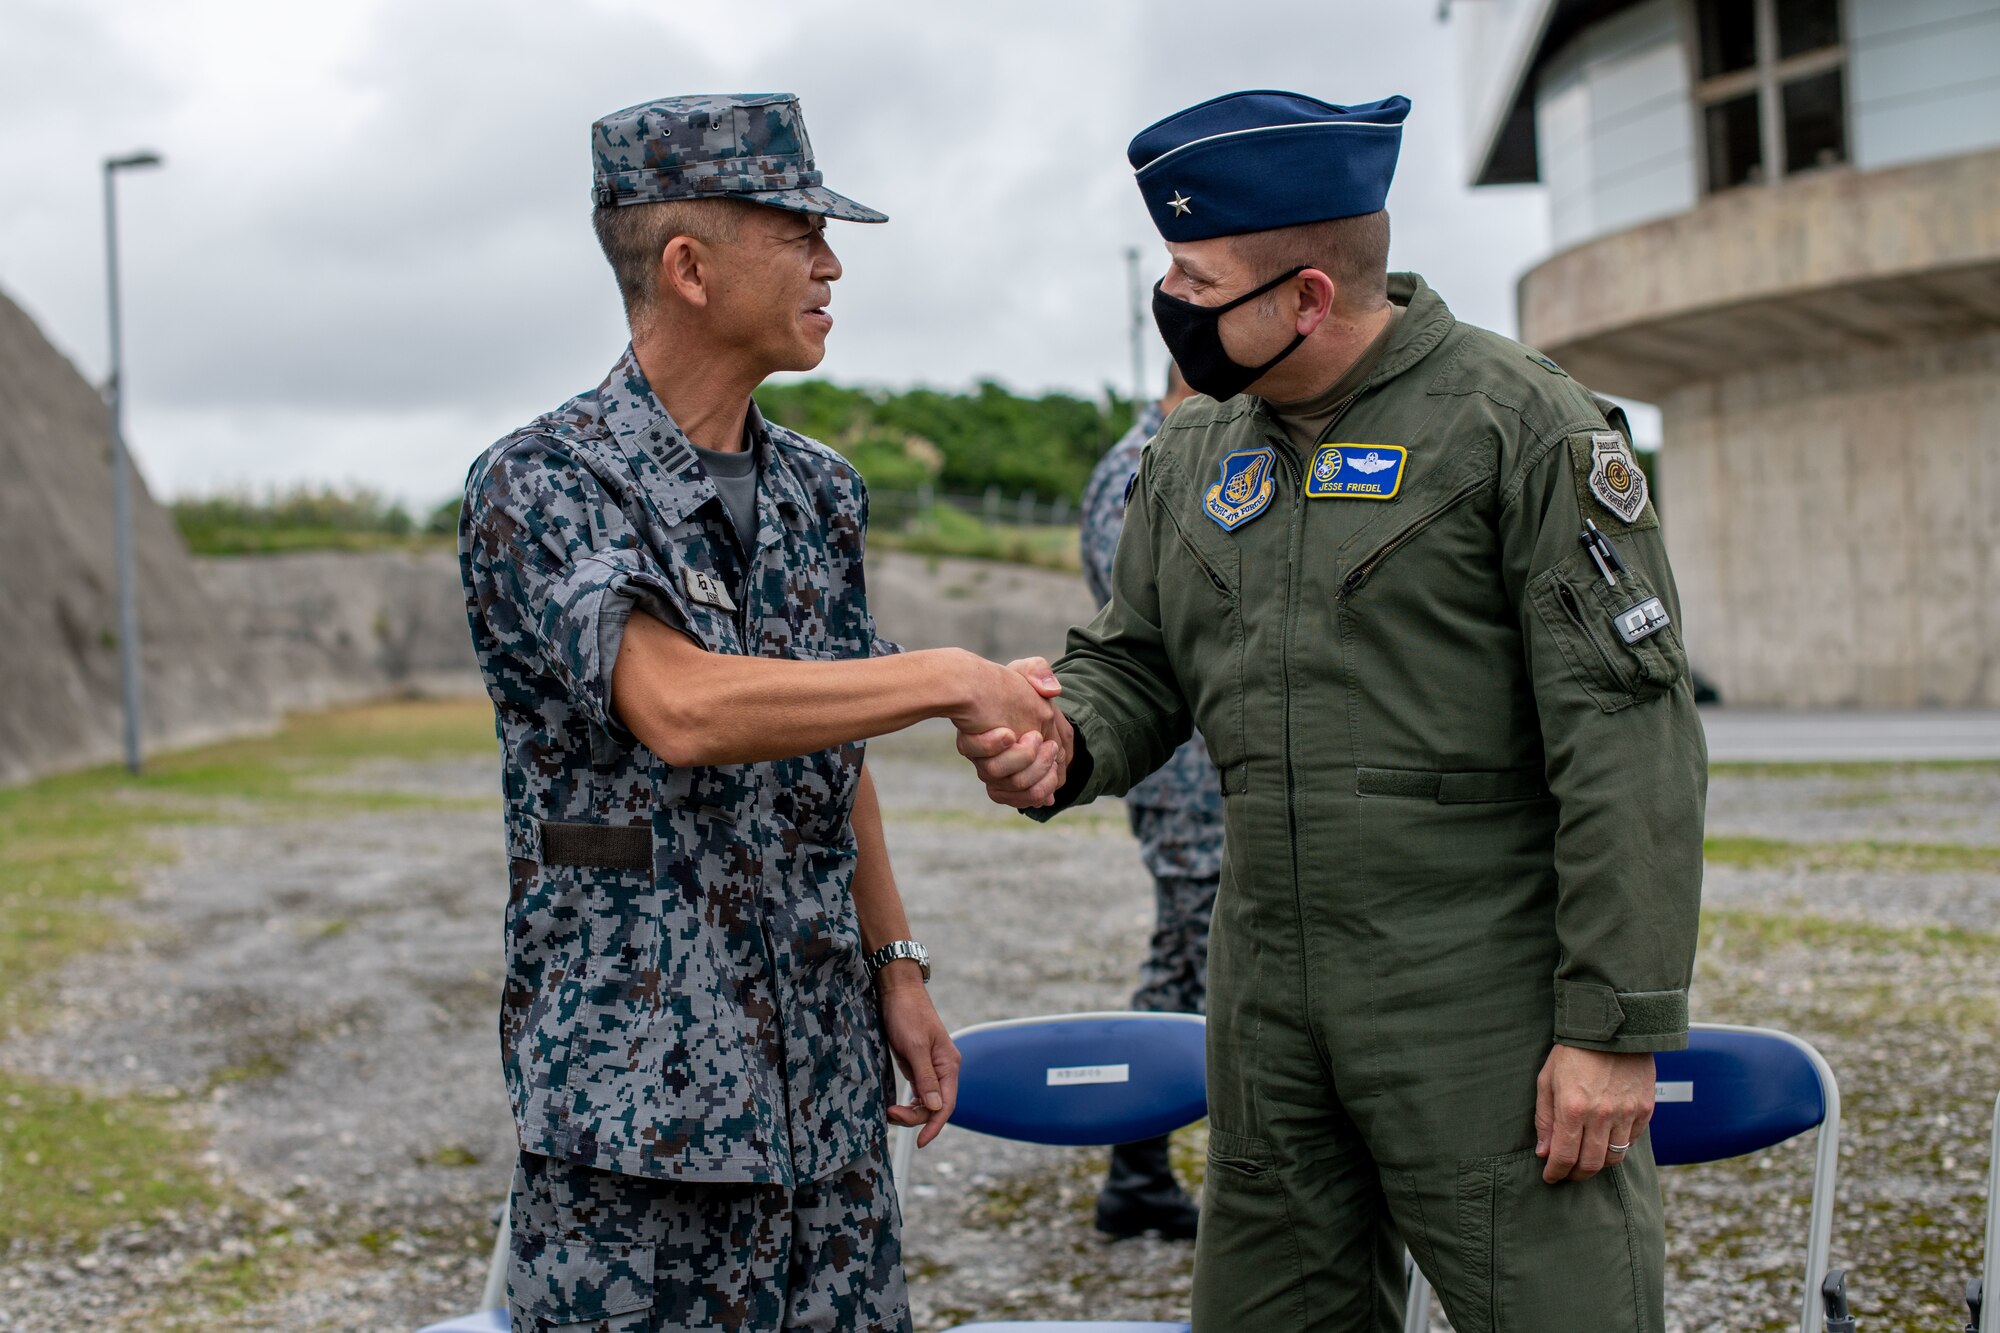 An Airman and Japanese service member shake hands.